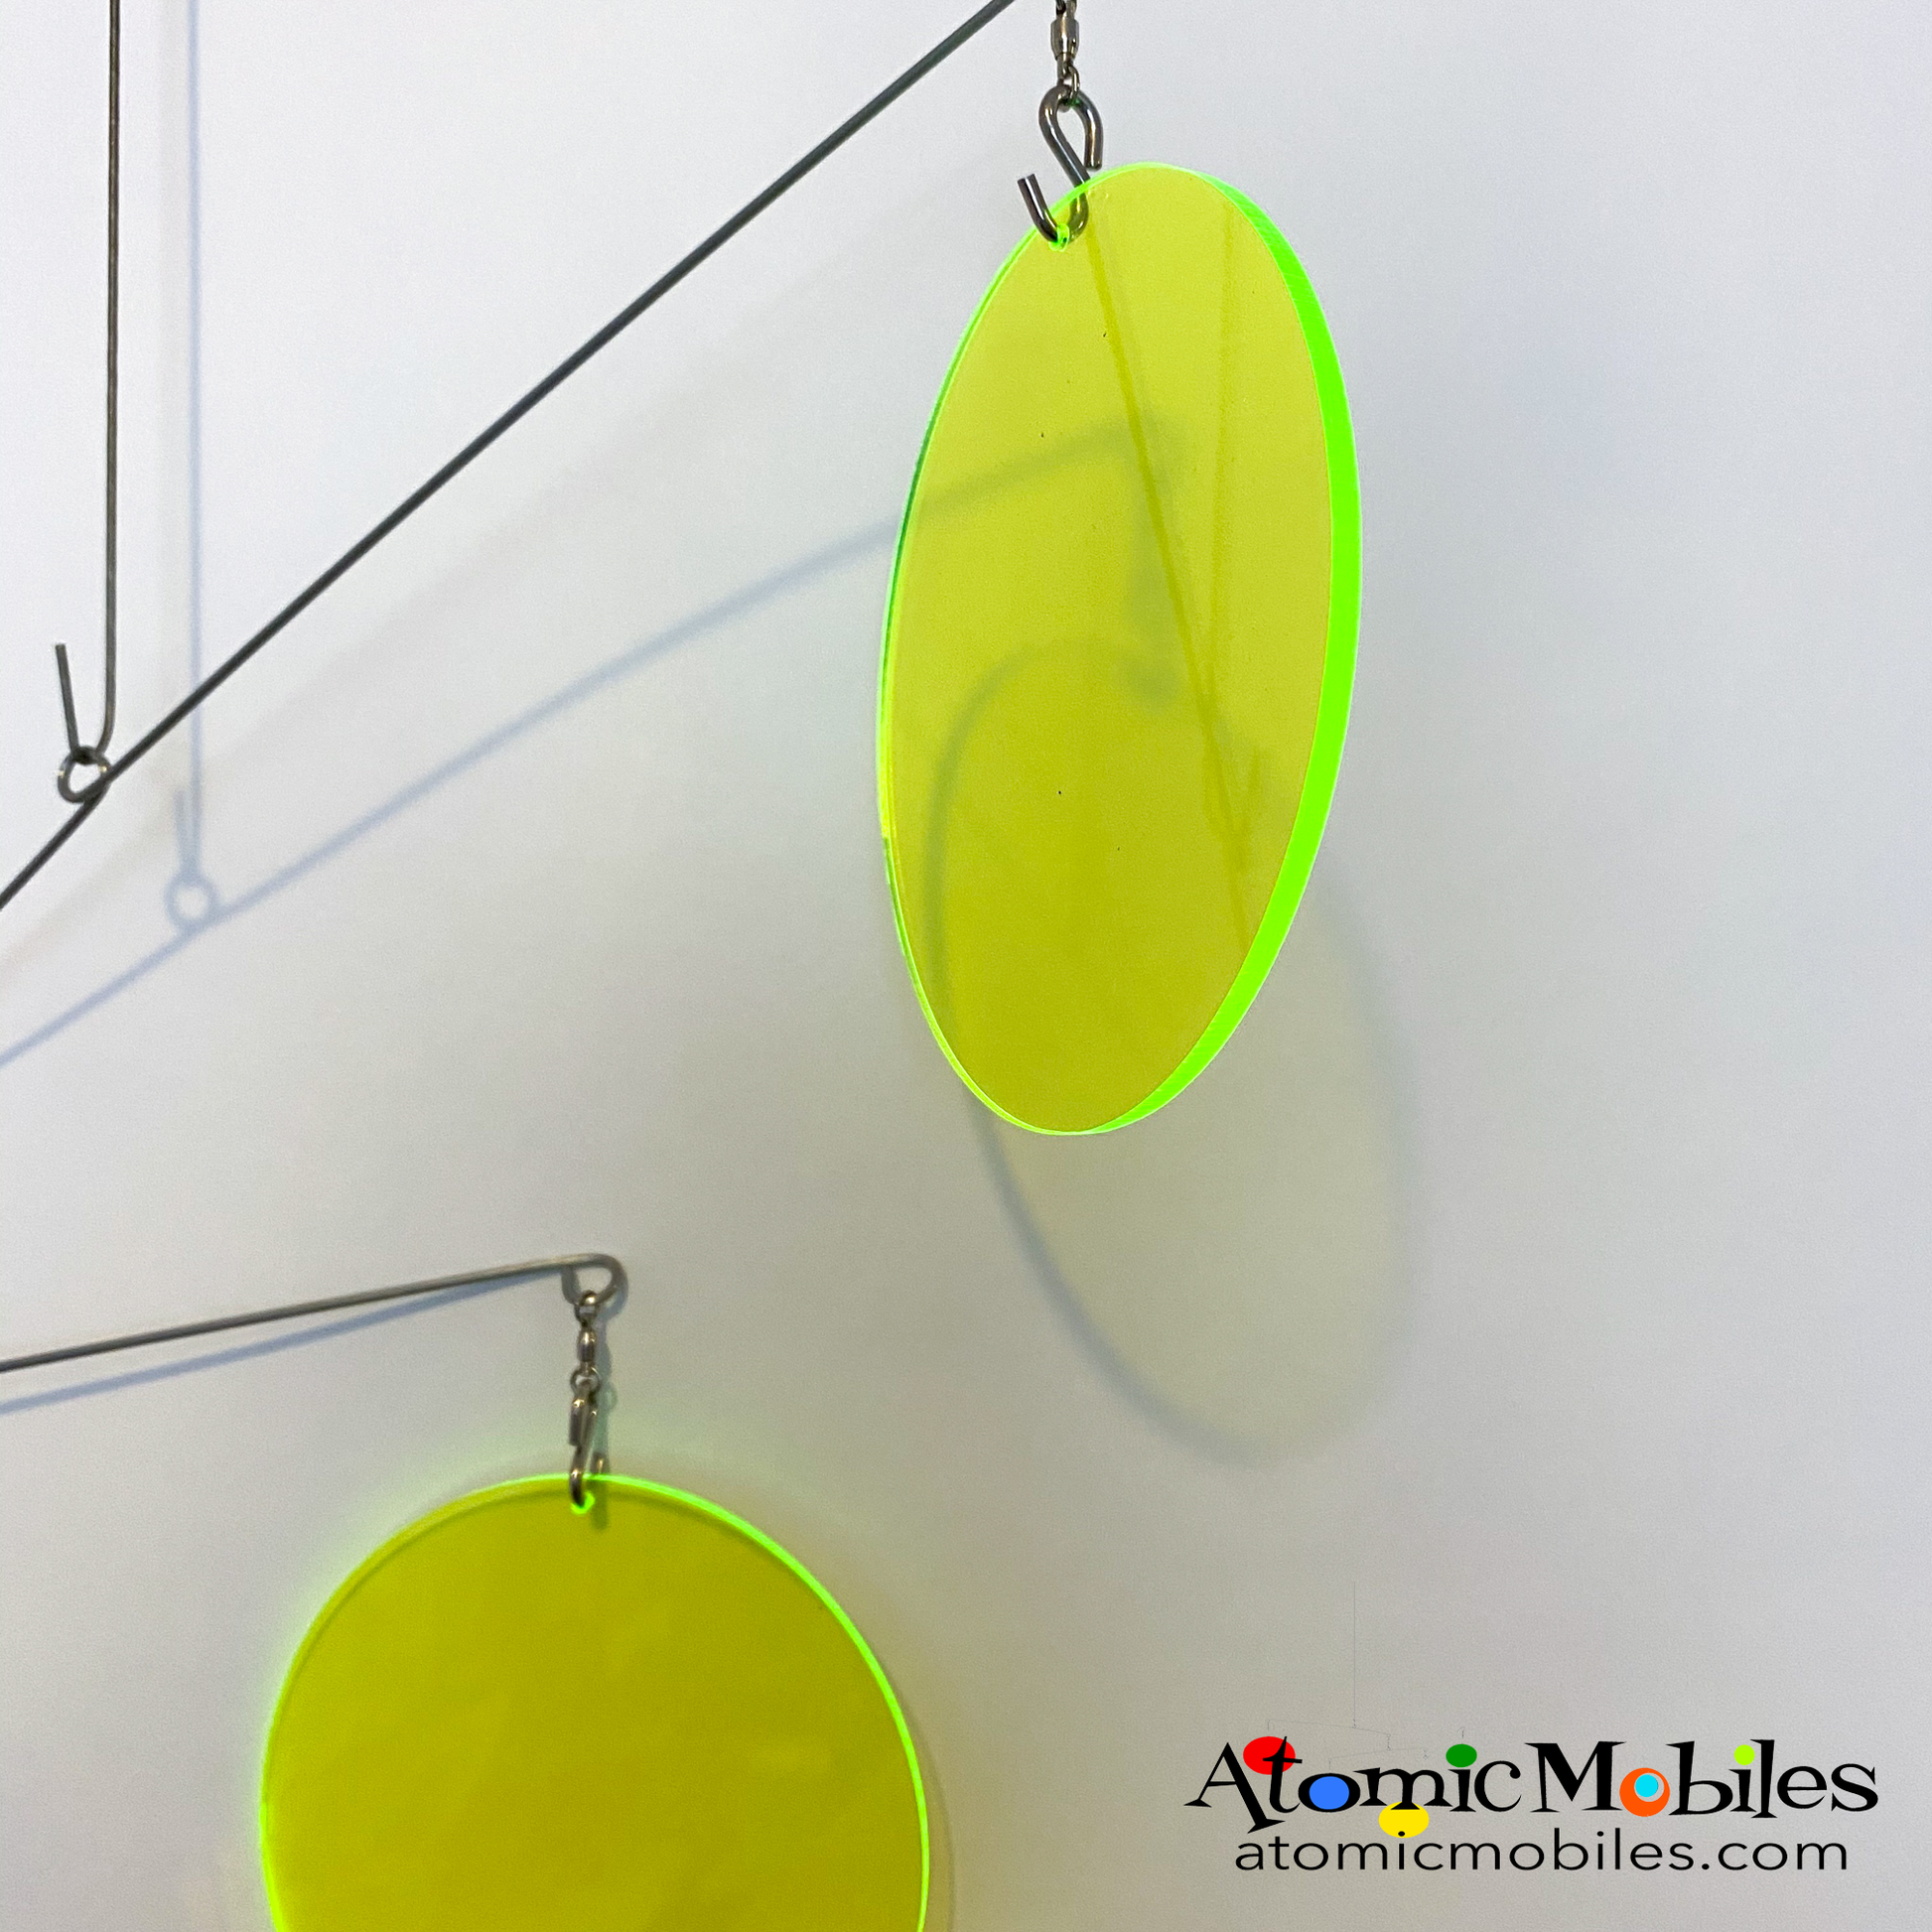 Neon Fluorescent Lime Green Atomic Mobile -  hanging modern kinetic art mobiles by AtomicMobiles.com